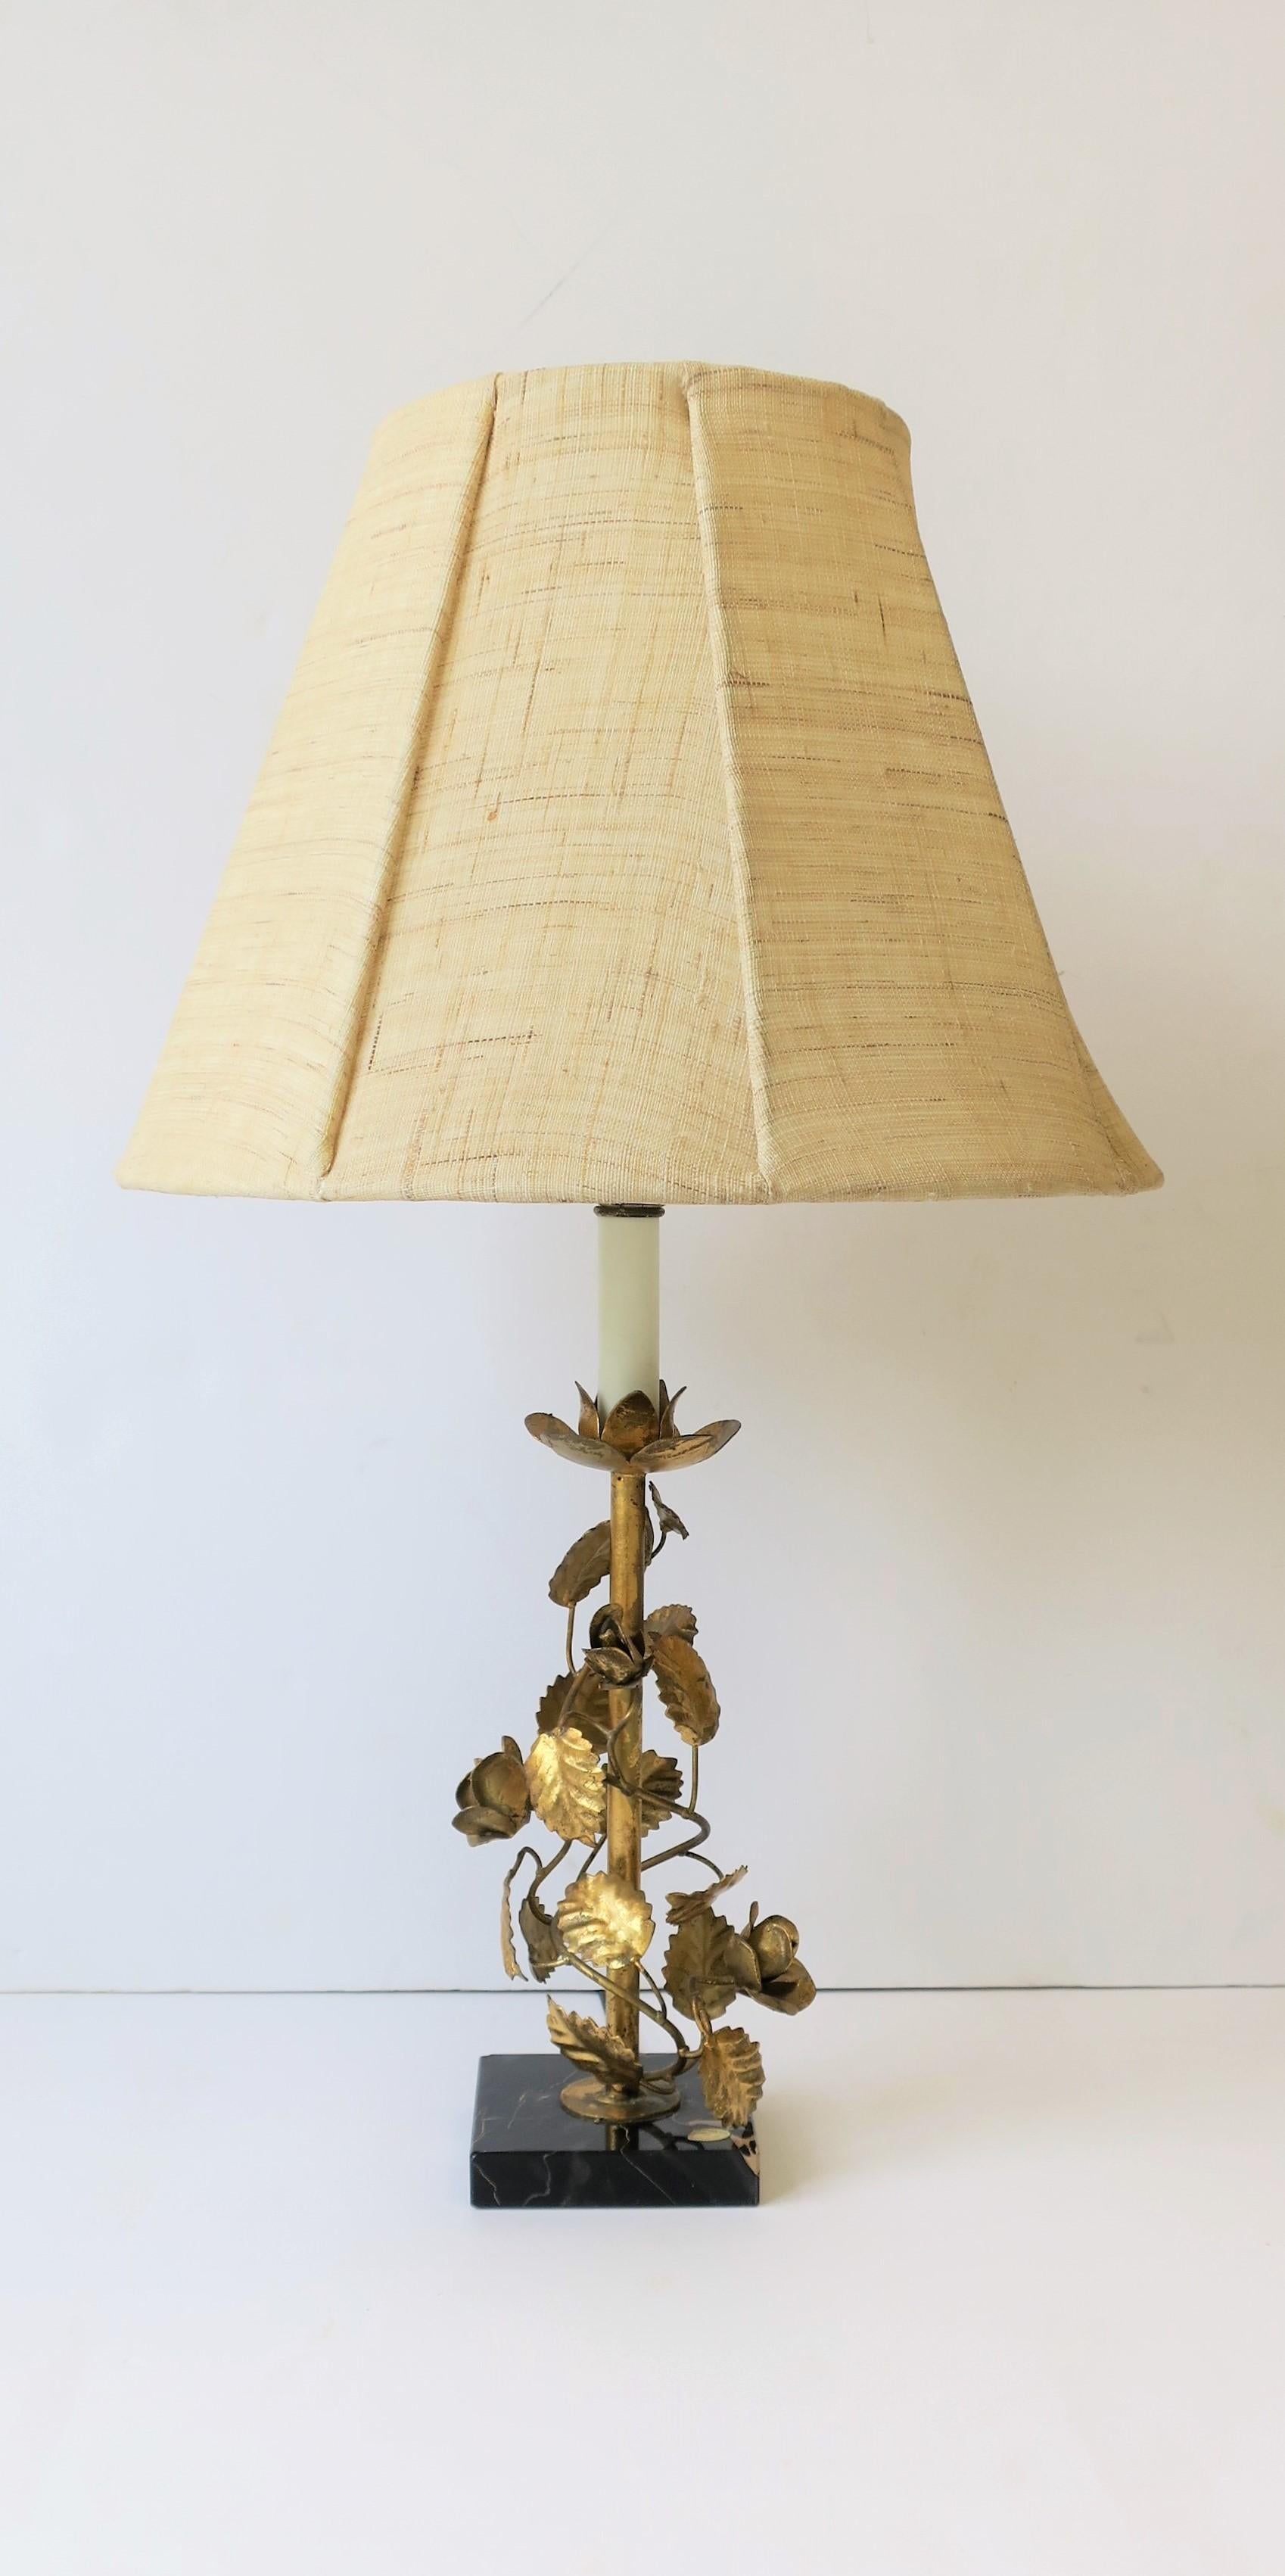 A beautiful Mid-20th century Italian gold gilt tole and black marble table or desk lamp, Italy, circa 1960s. Gilt tole is a combination of flowers and leaves and the 1